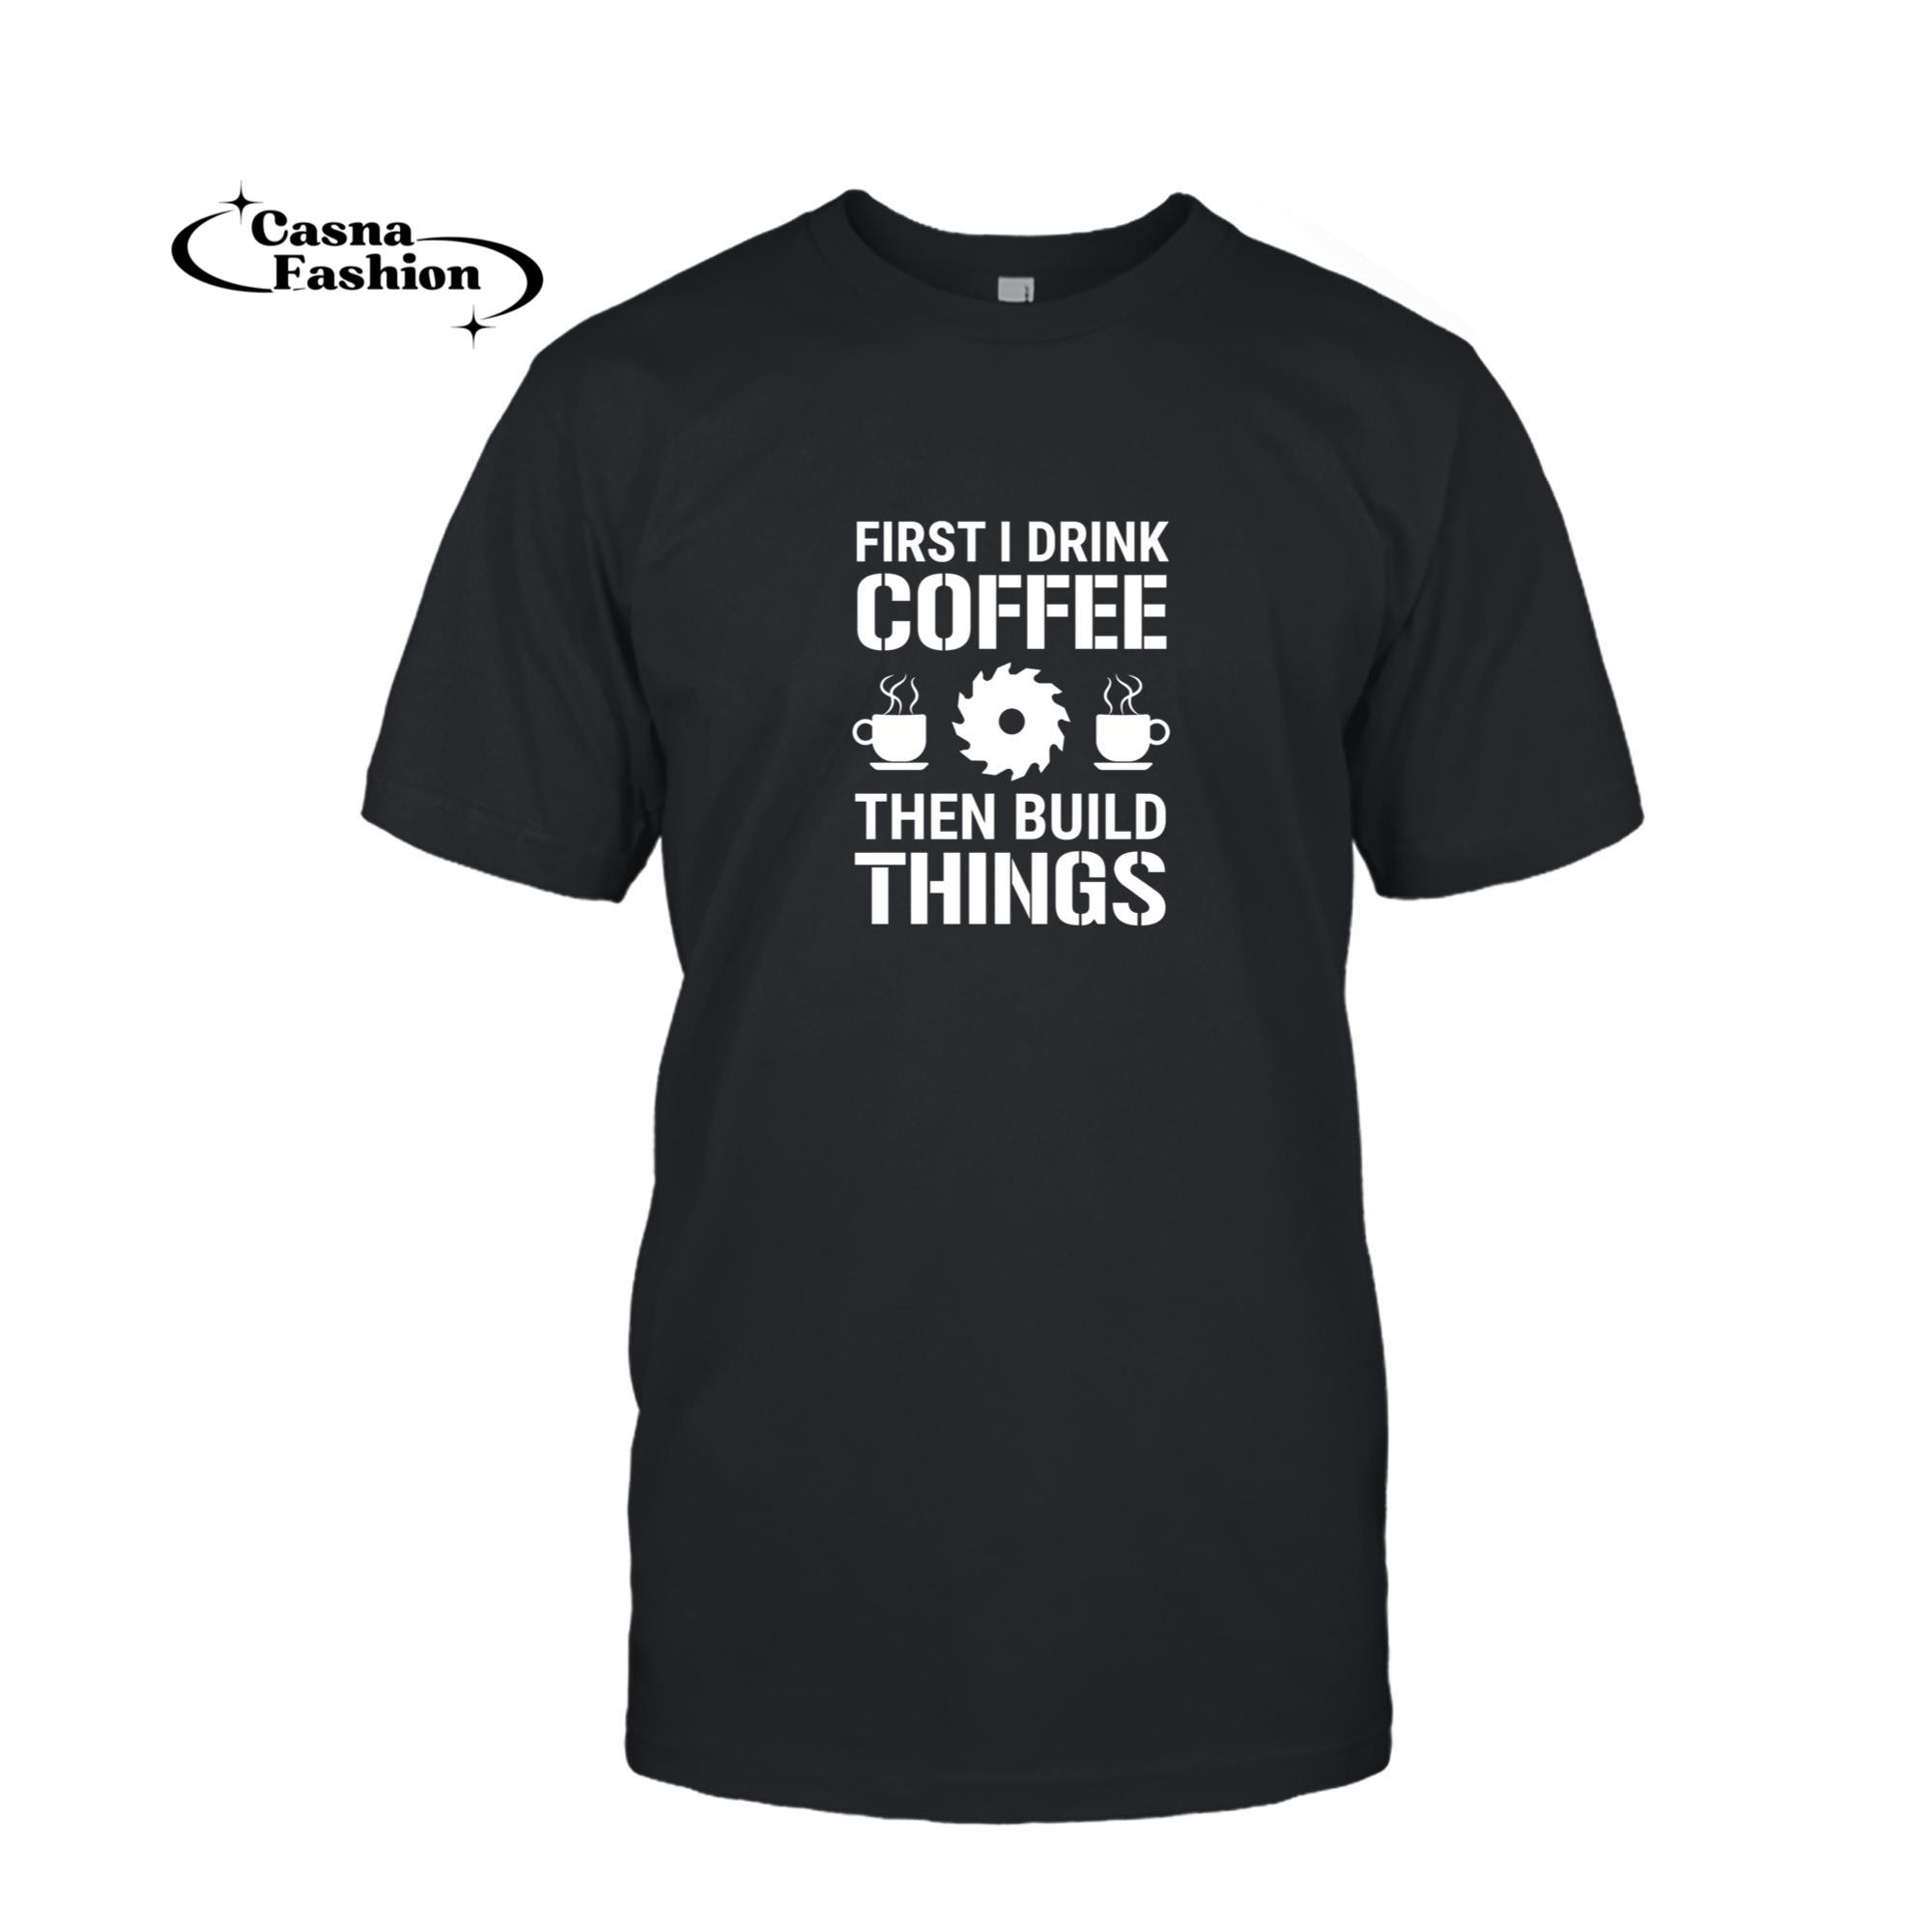 casnafashion_T-shirt_First I Drink Coffee Then Build Things Carpenter Woodworking Pullover Hoodie_T-shirt_Black